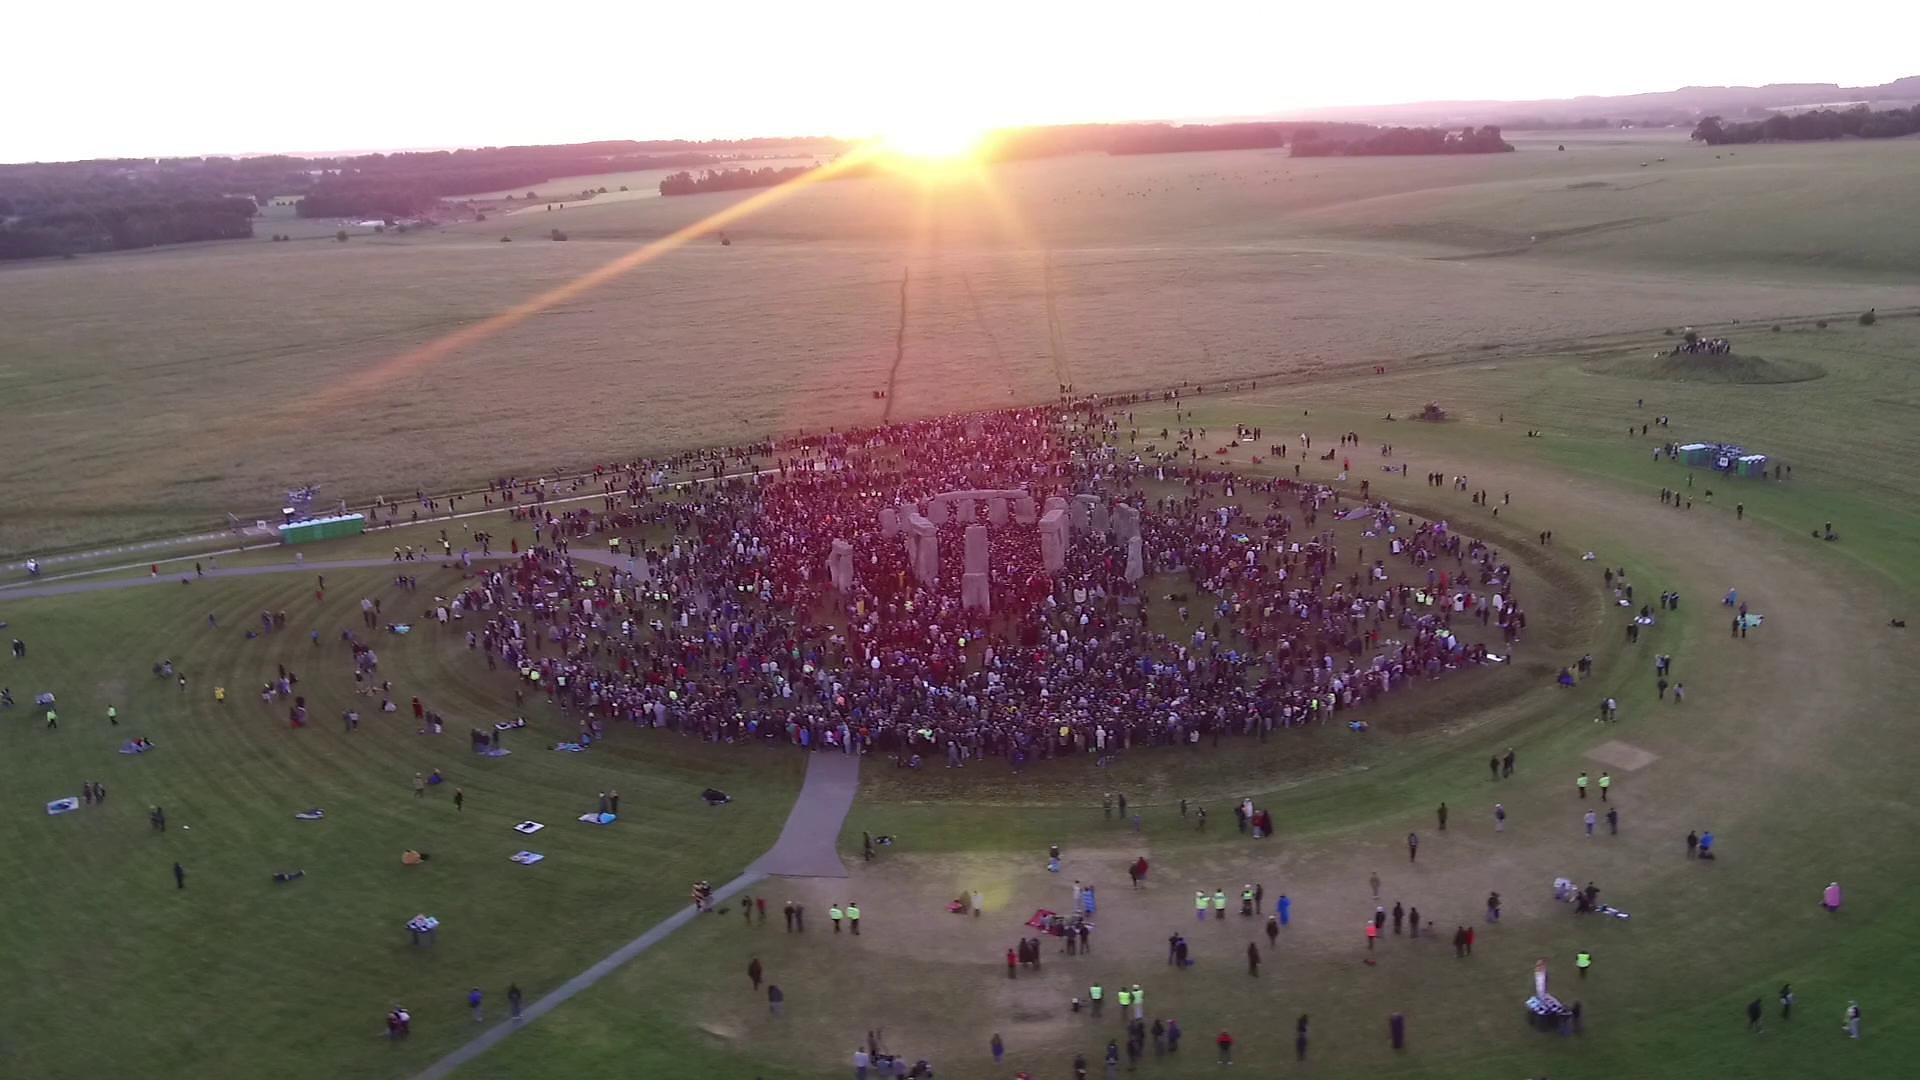 Summer Solstice from the sky at Stonehenge